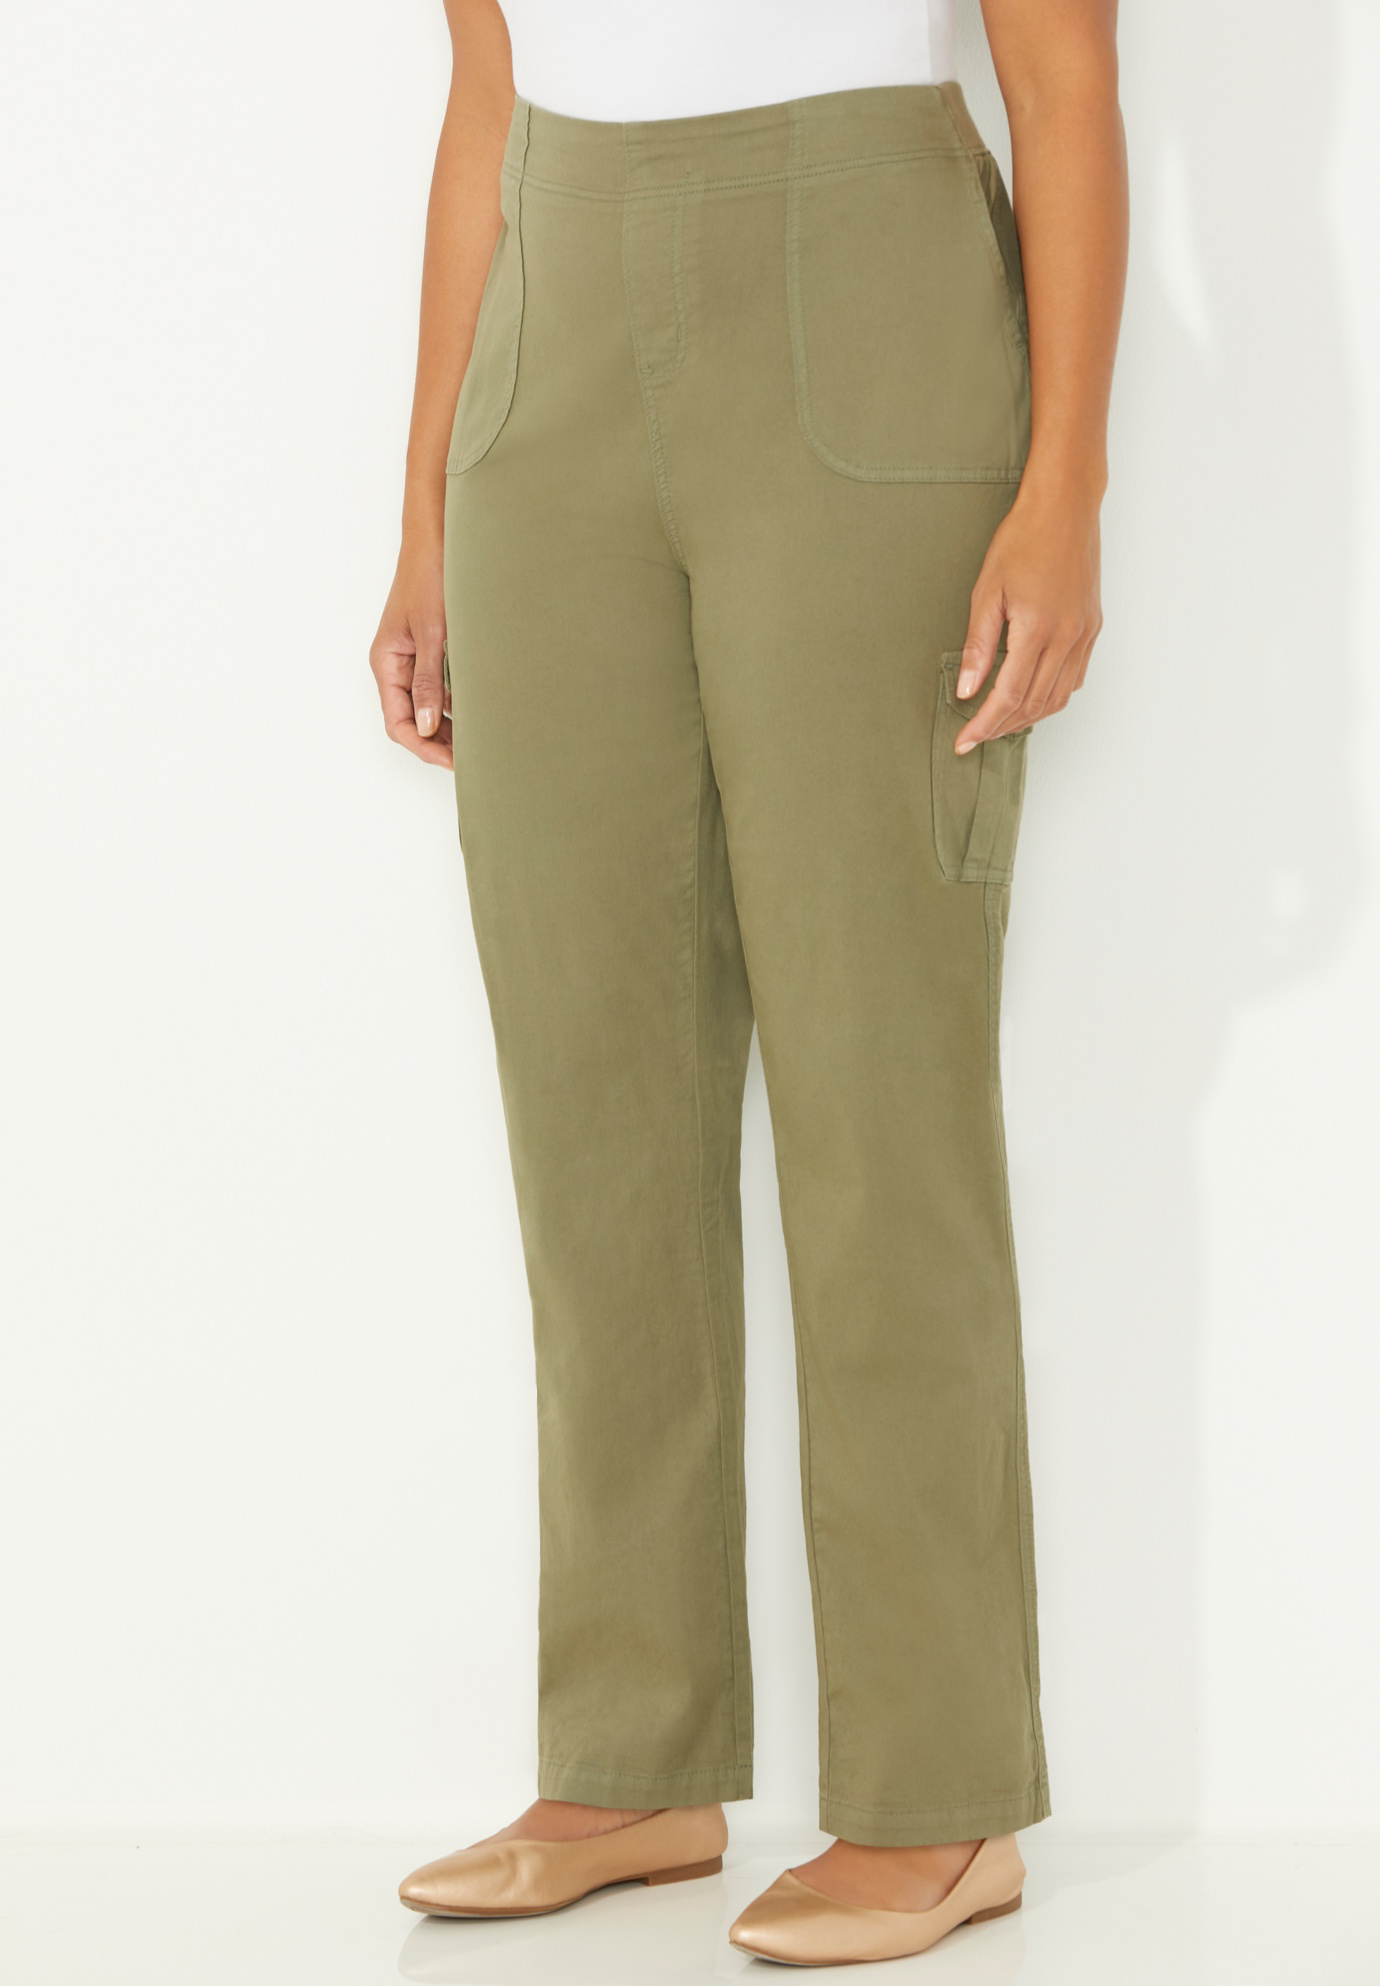 Knit Waist Cargo Pant With Zip Fly, 